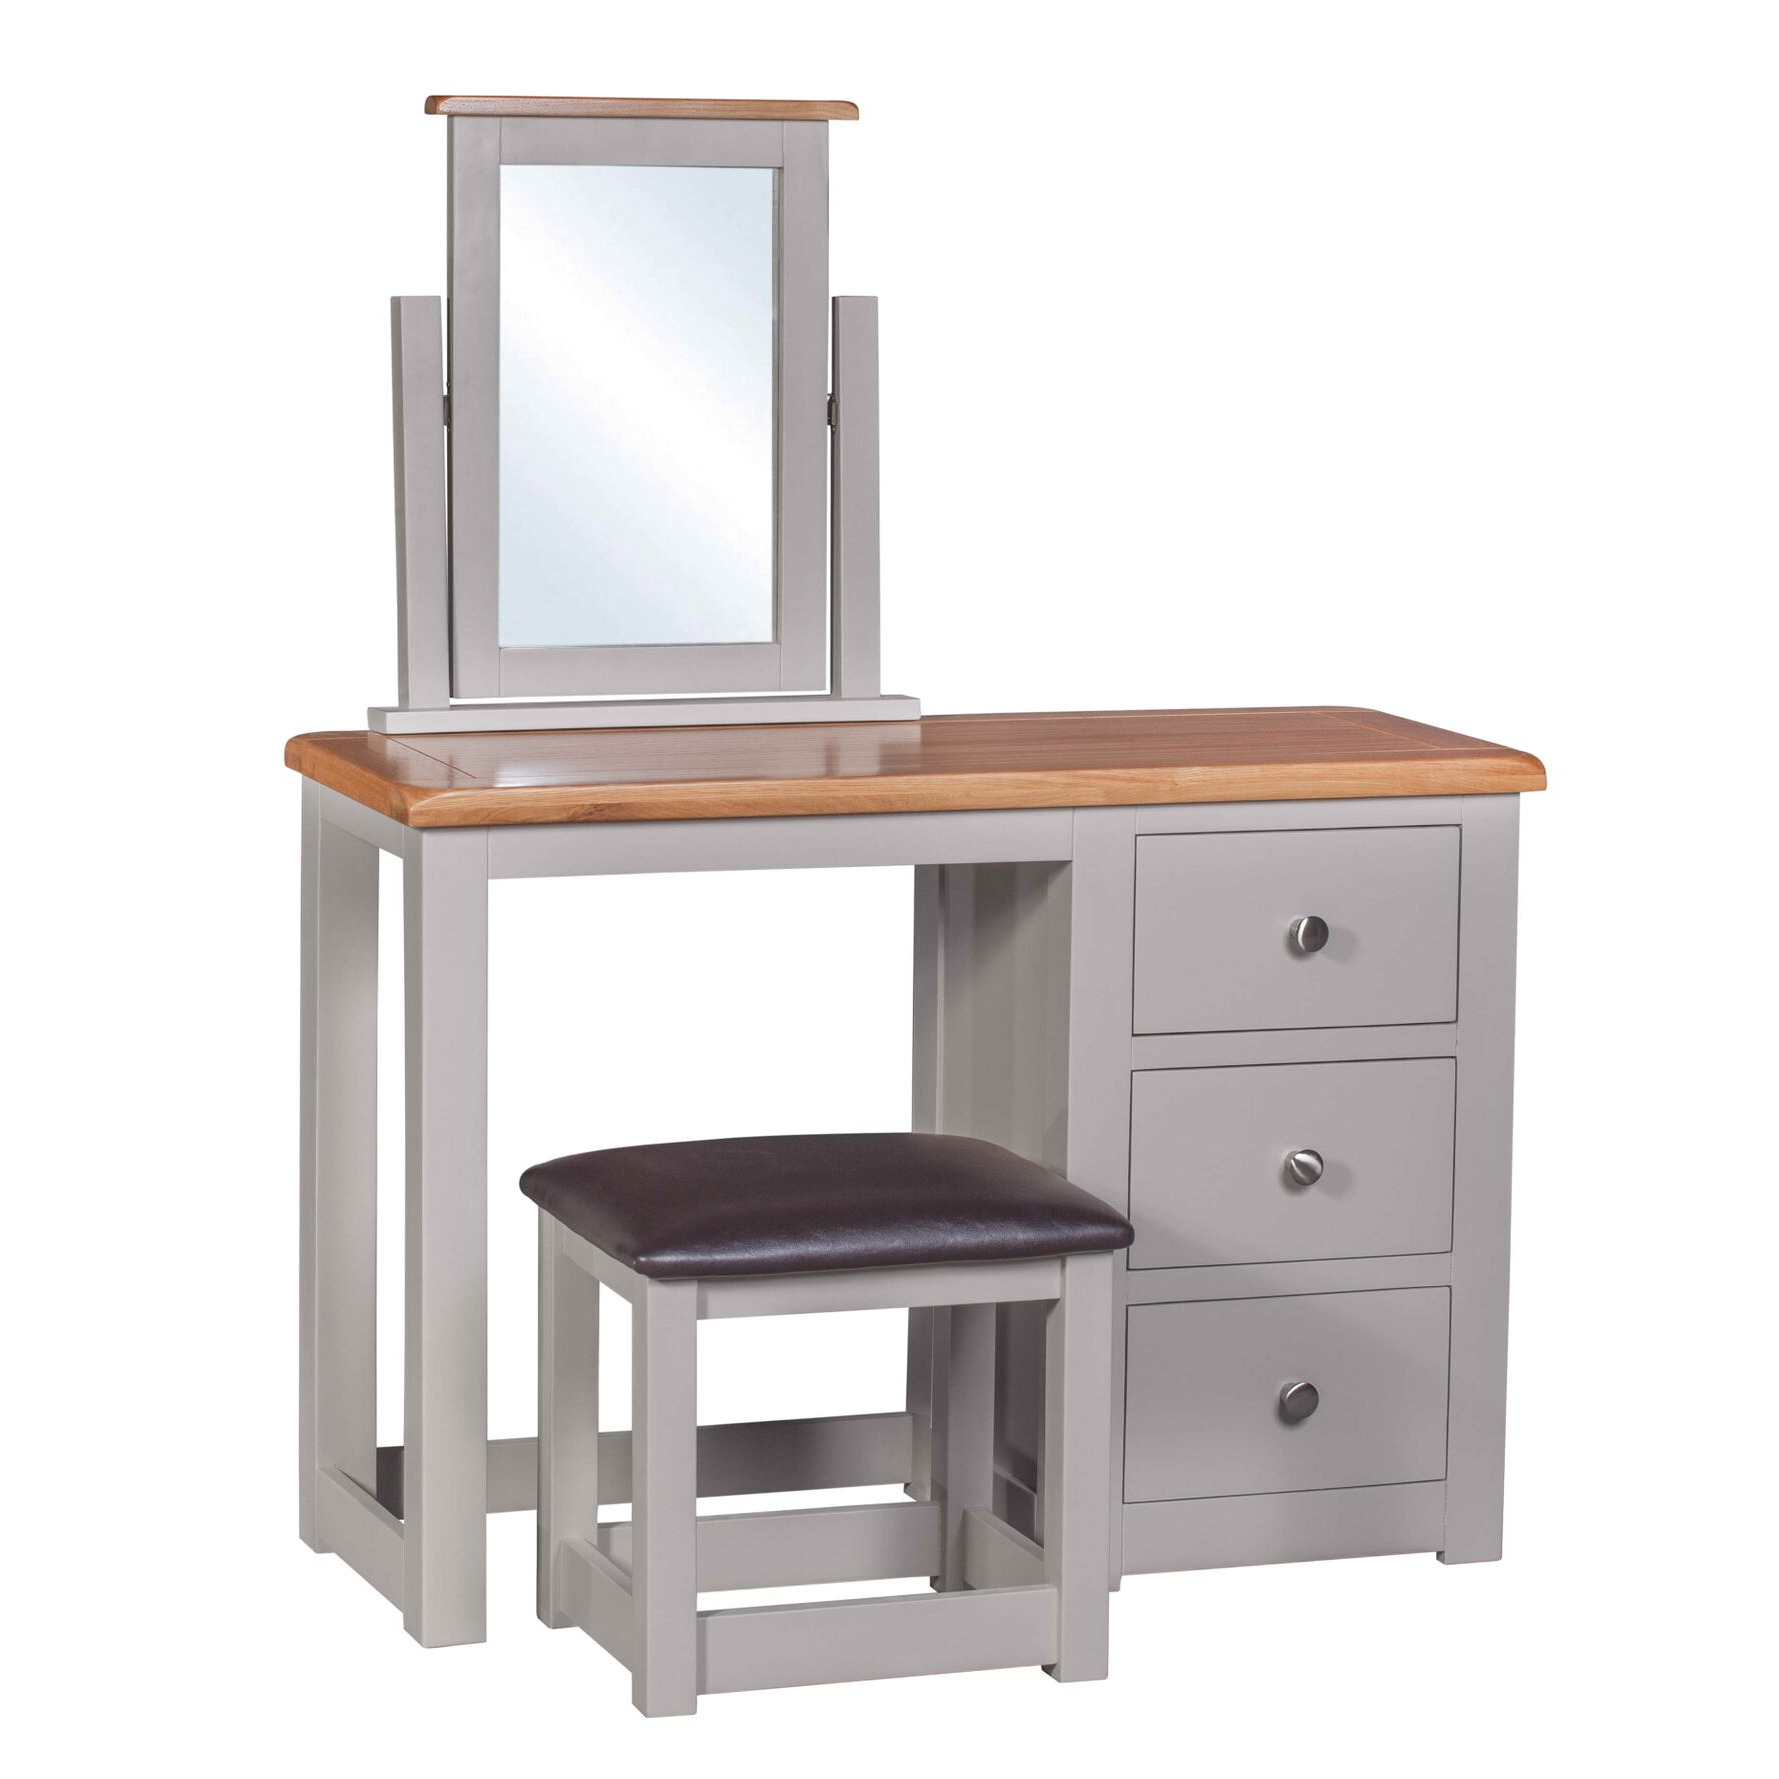 Roberta Dressing Table and Stool